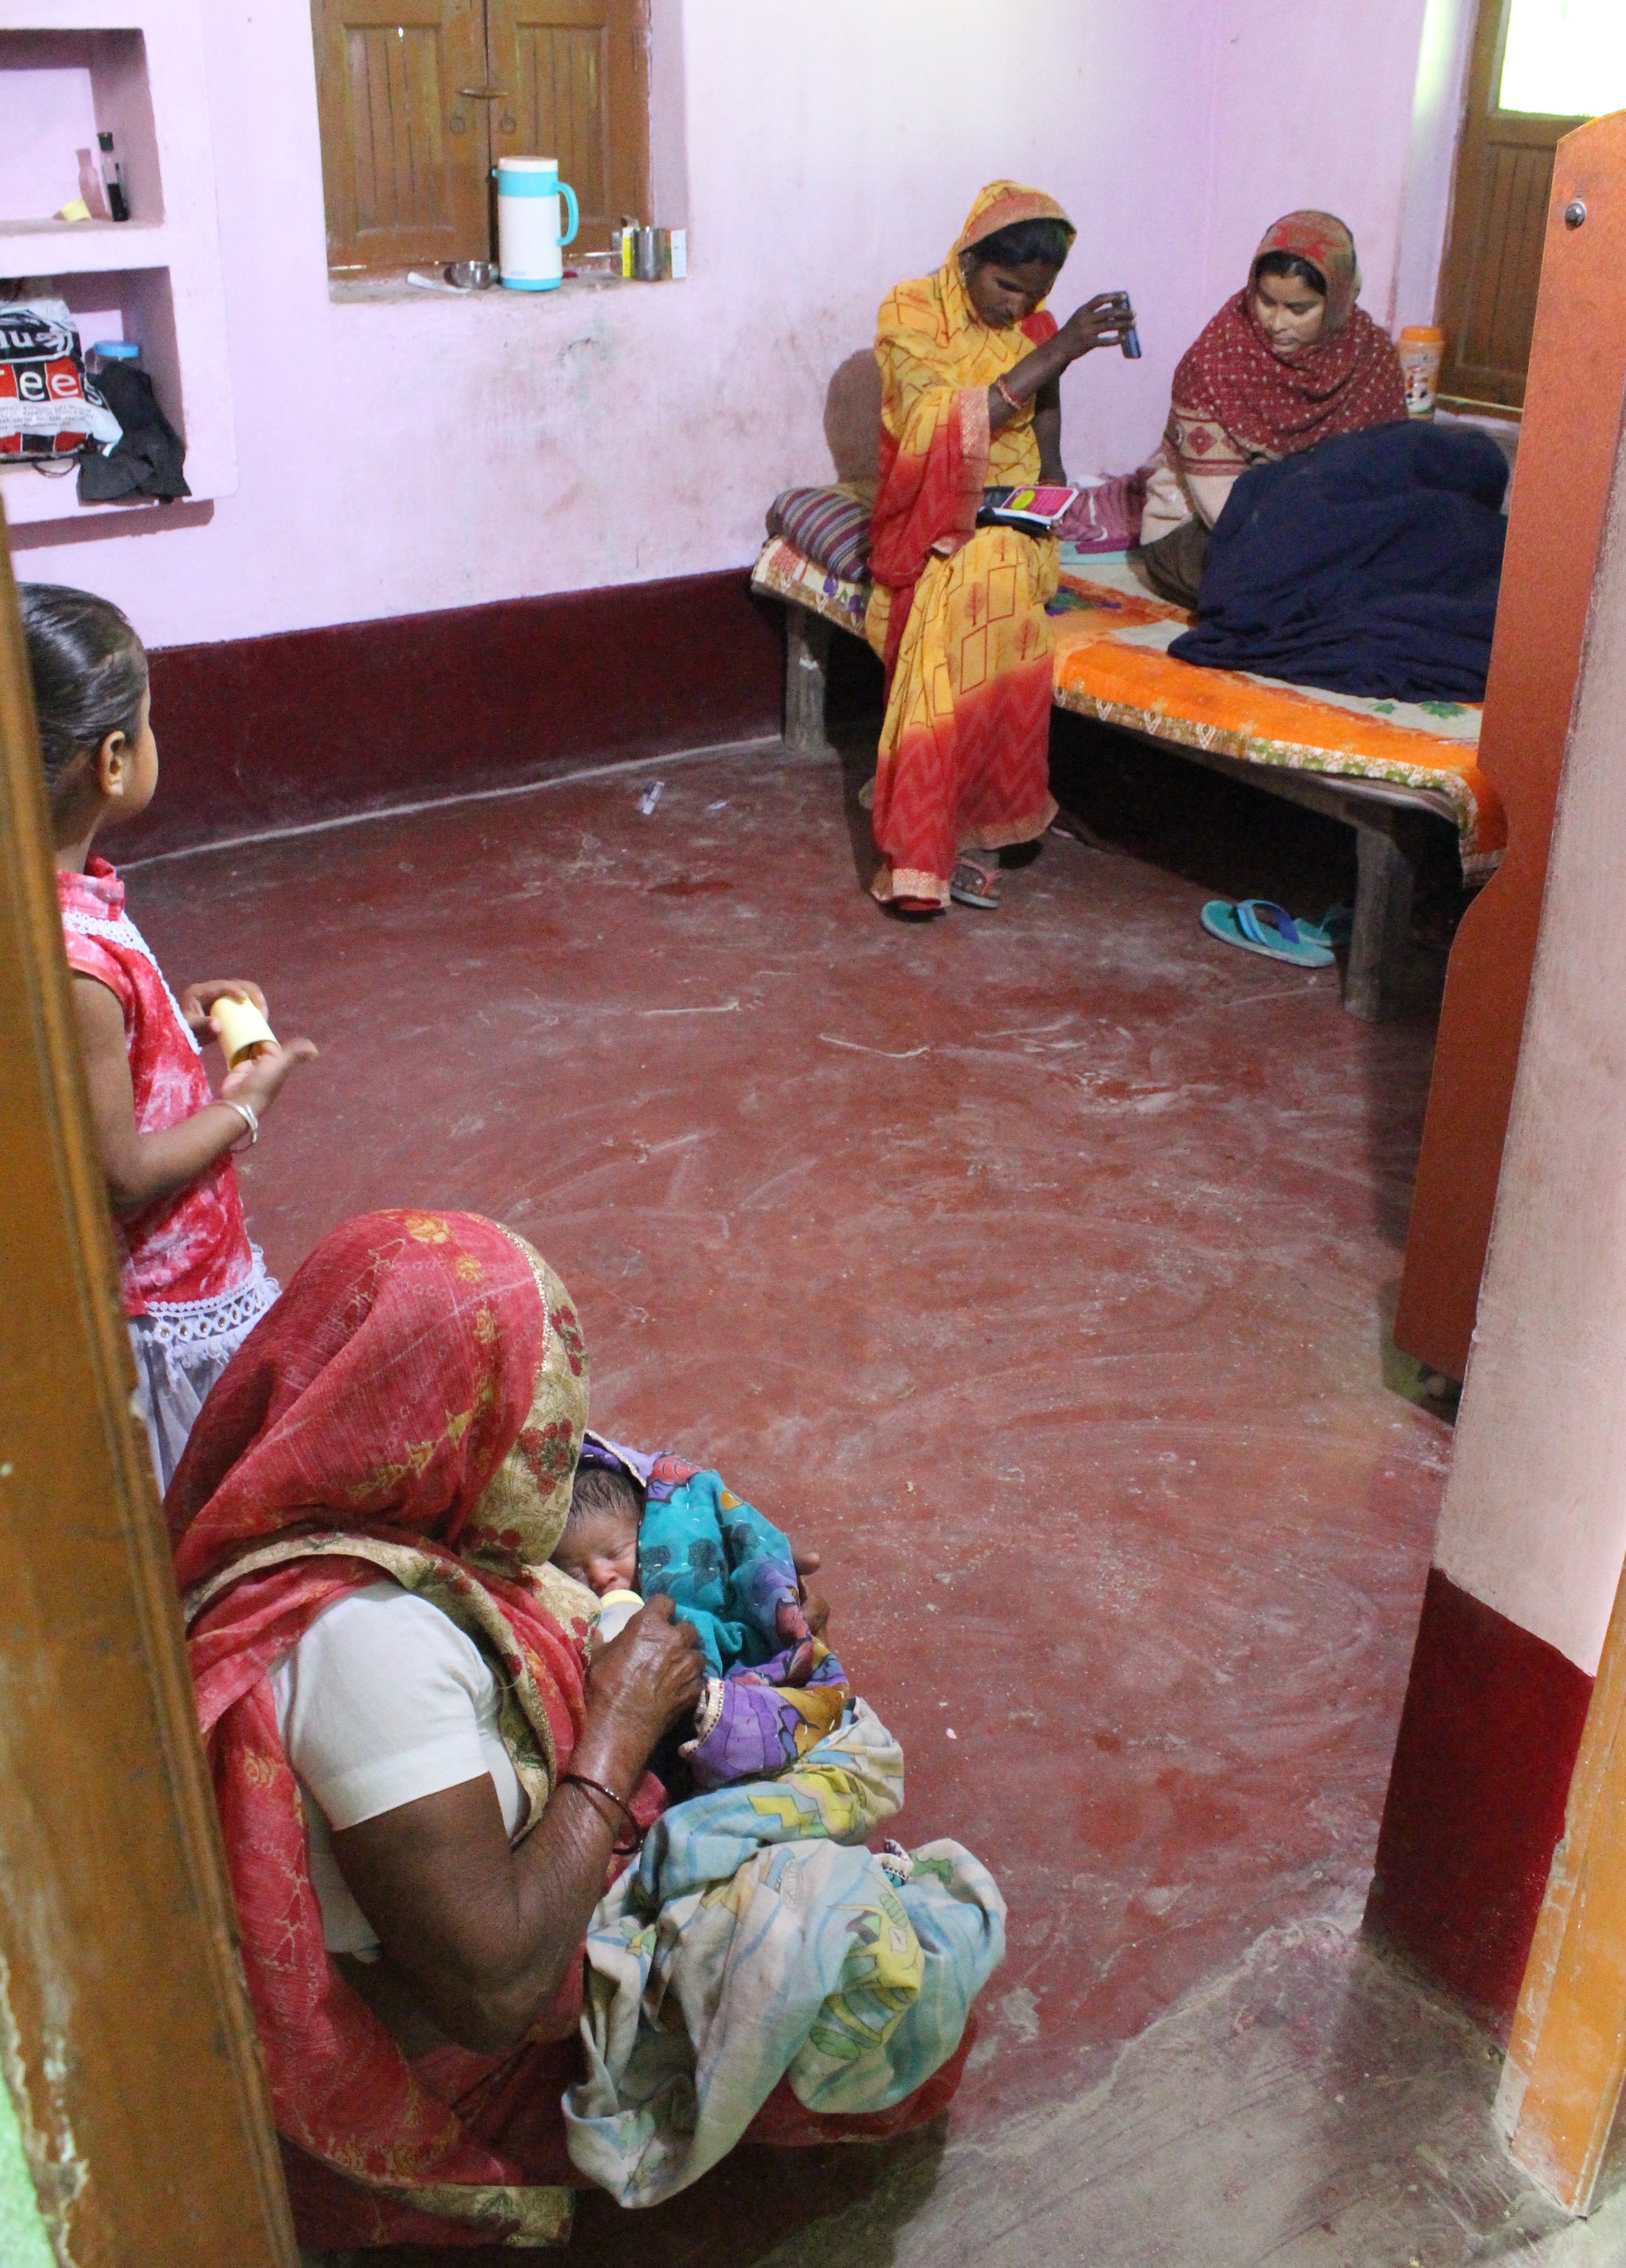 An ASHA plays a recording from her mobile phone about the importance of breast-feeding to a mother, while the mother's new baby is being bottle-fed in the foreground, potentially showing a contrast between an emphasis on service extension and cultural facilitation.